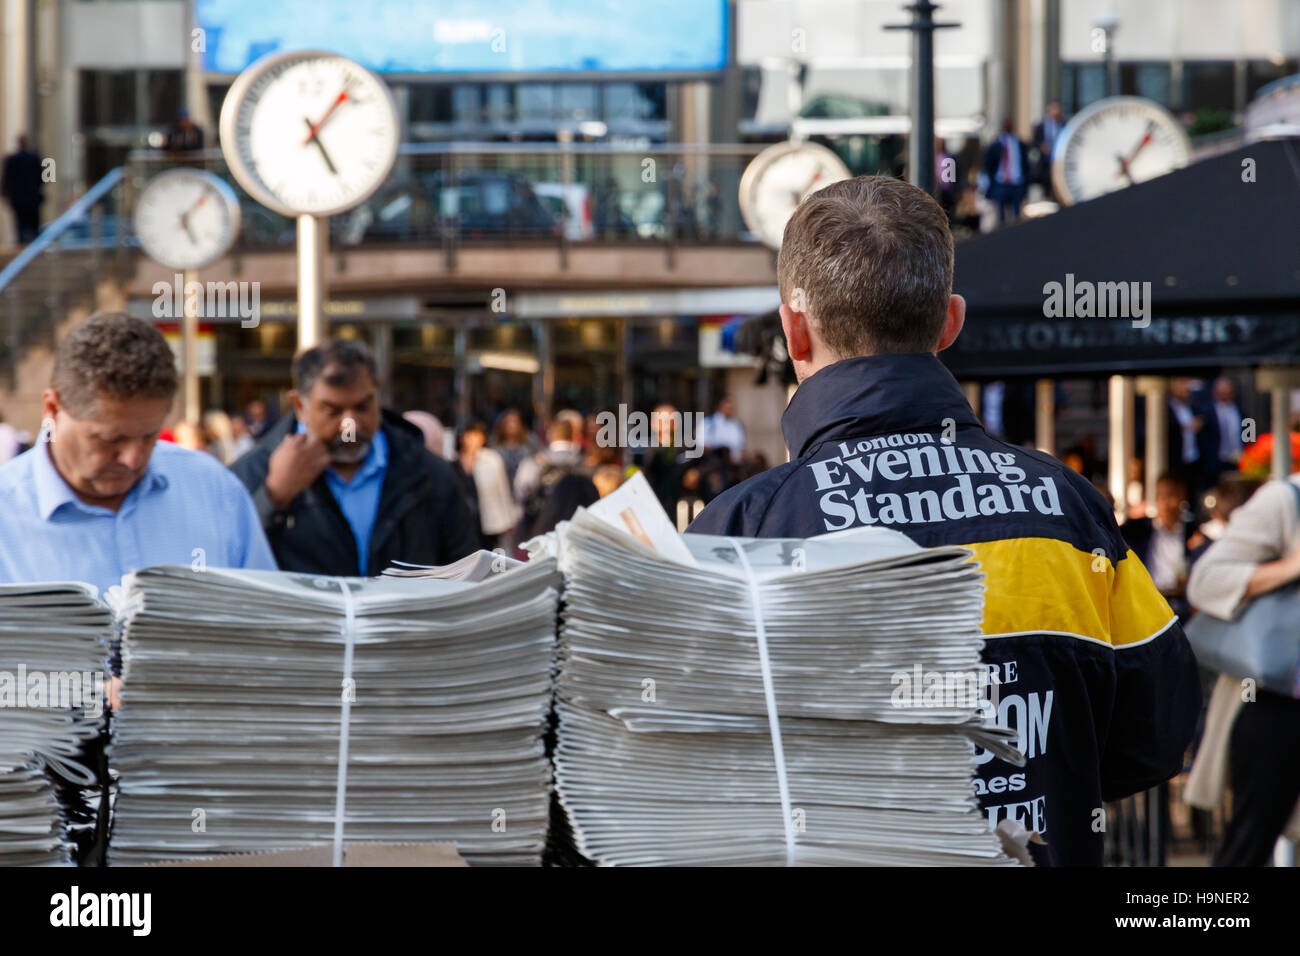 London, UK - September 21, 2016 - Distribution of the Evening Standard free newspaper in Canary Wharf Stock Photo